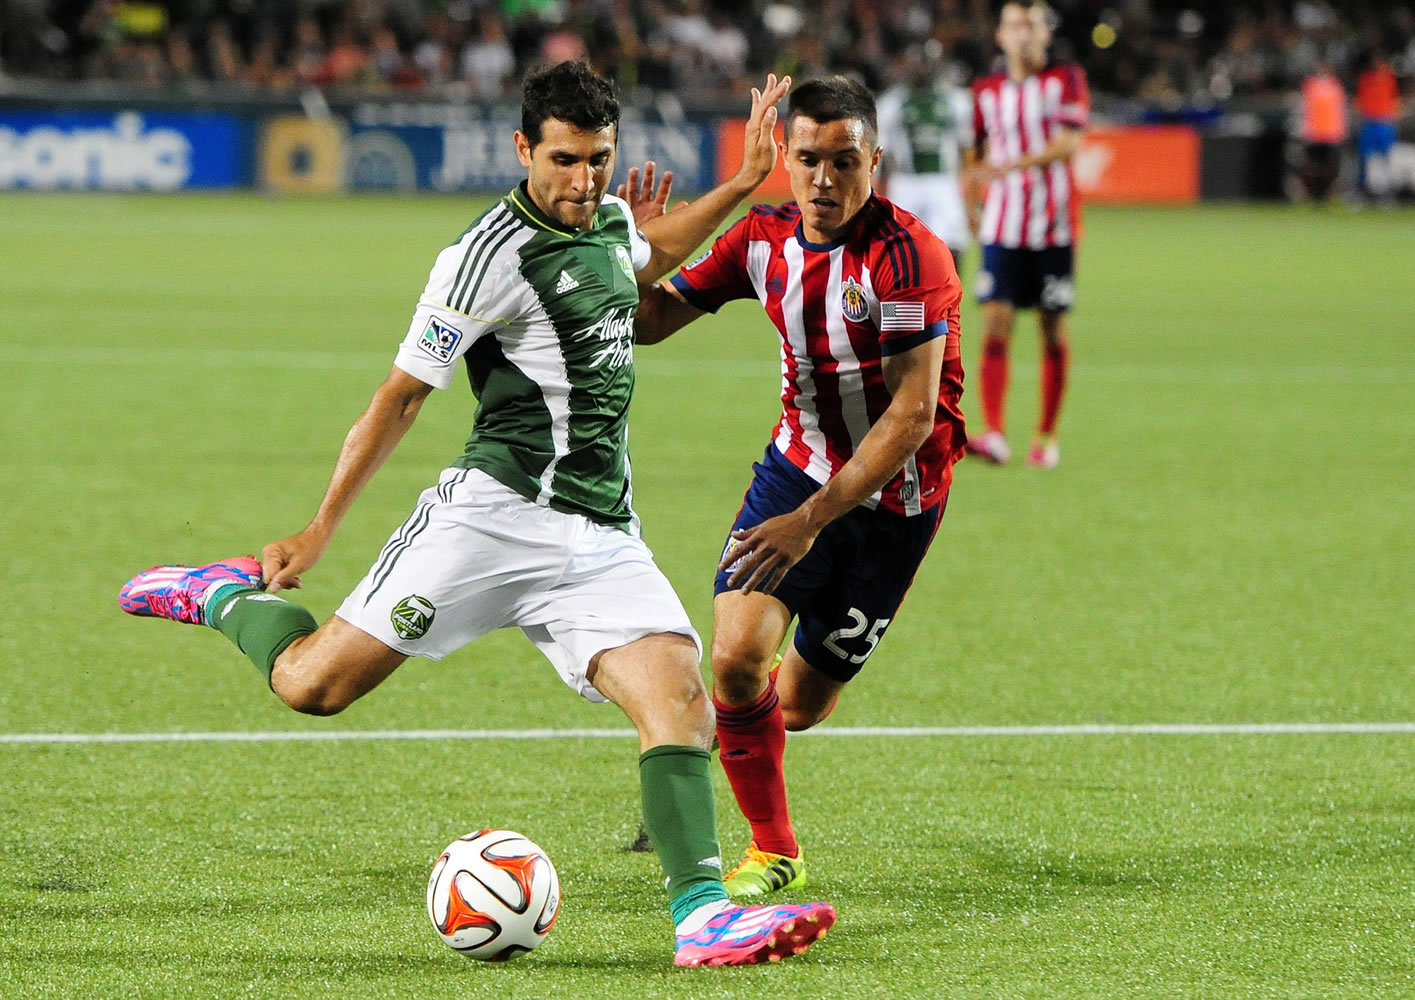 Portland Timbers midfielder Diego Valeri, left, puts a shot on goal as Chivas USA defender Donny Toia closes in during the second half Saturday, Aug.